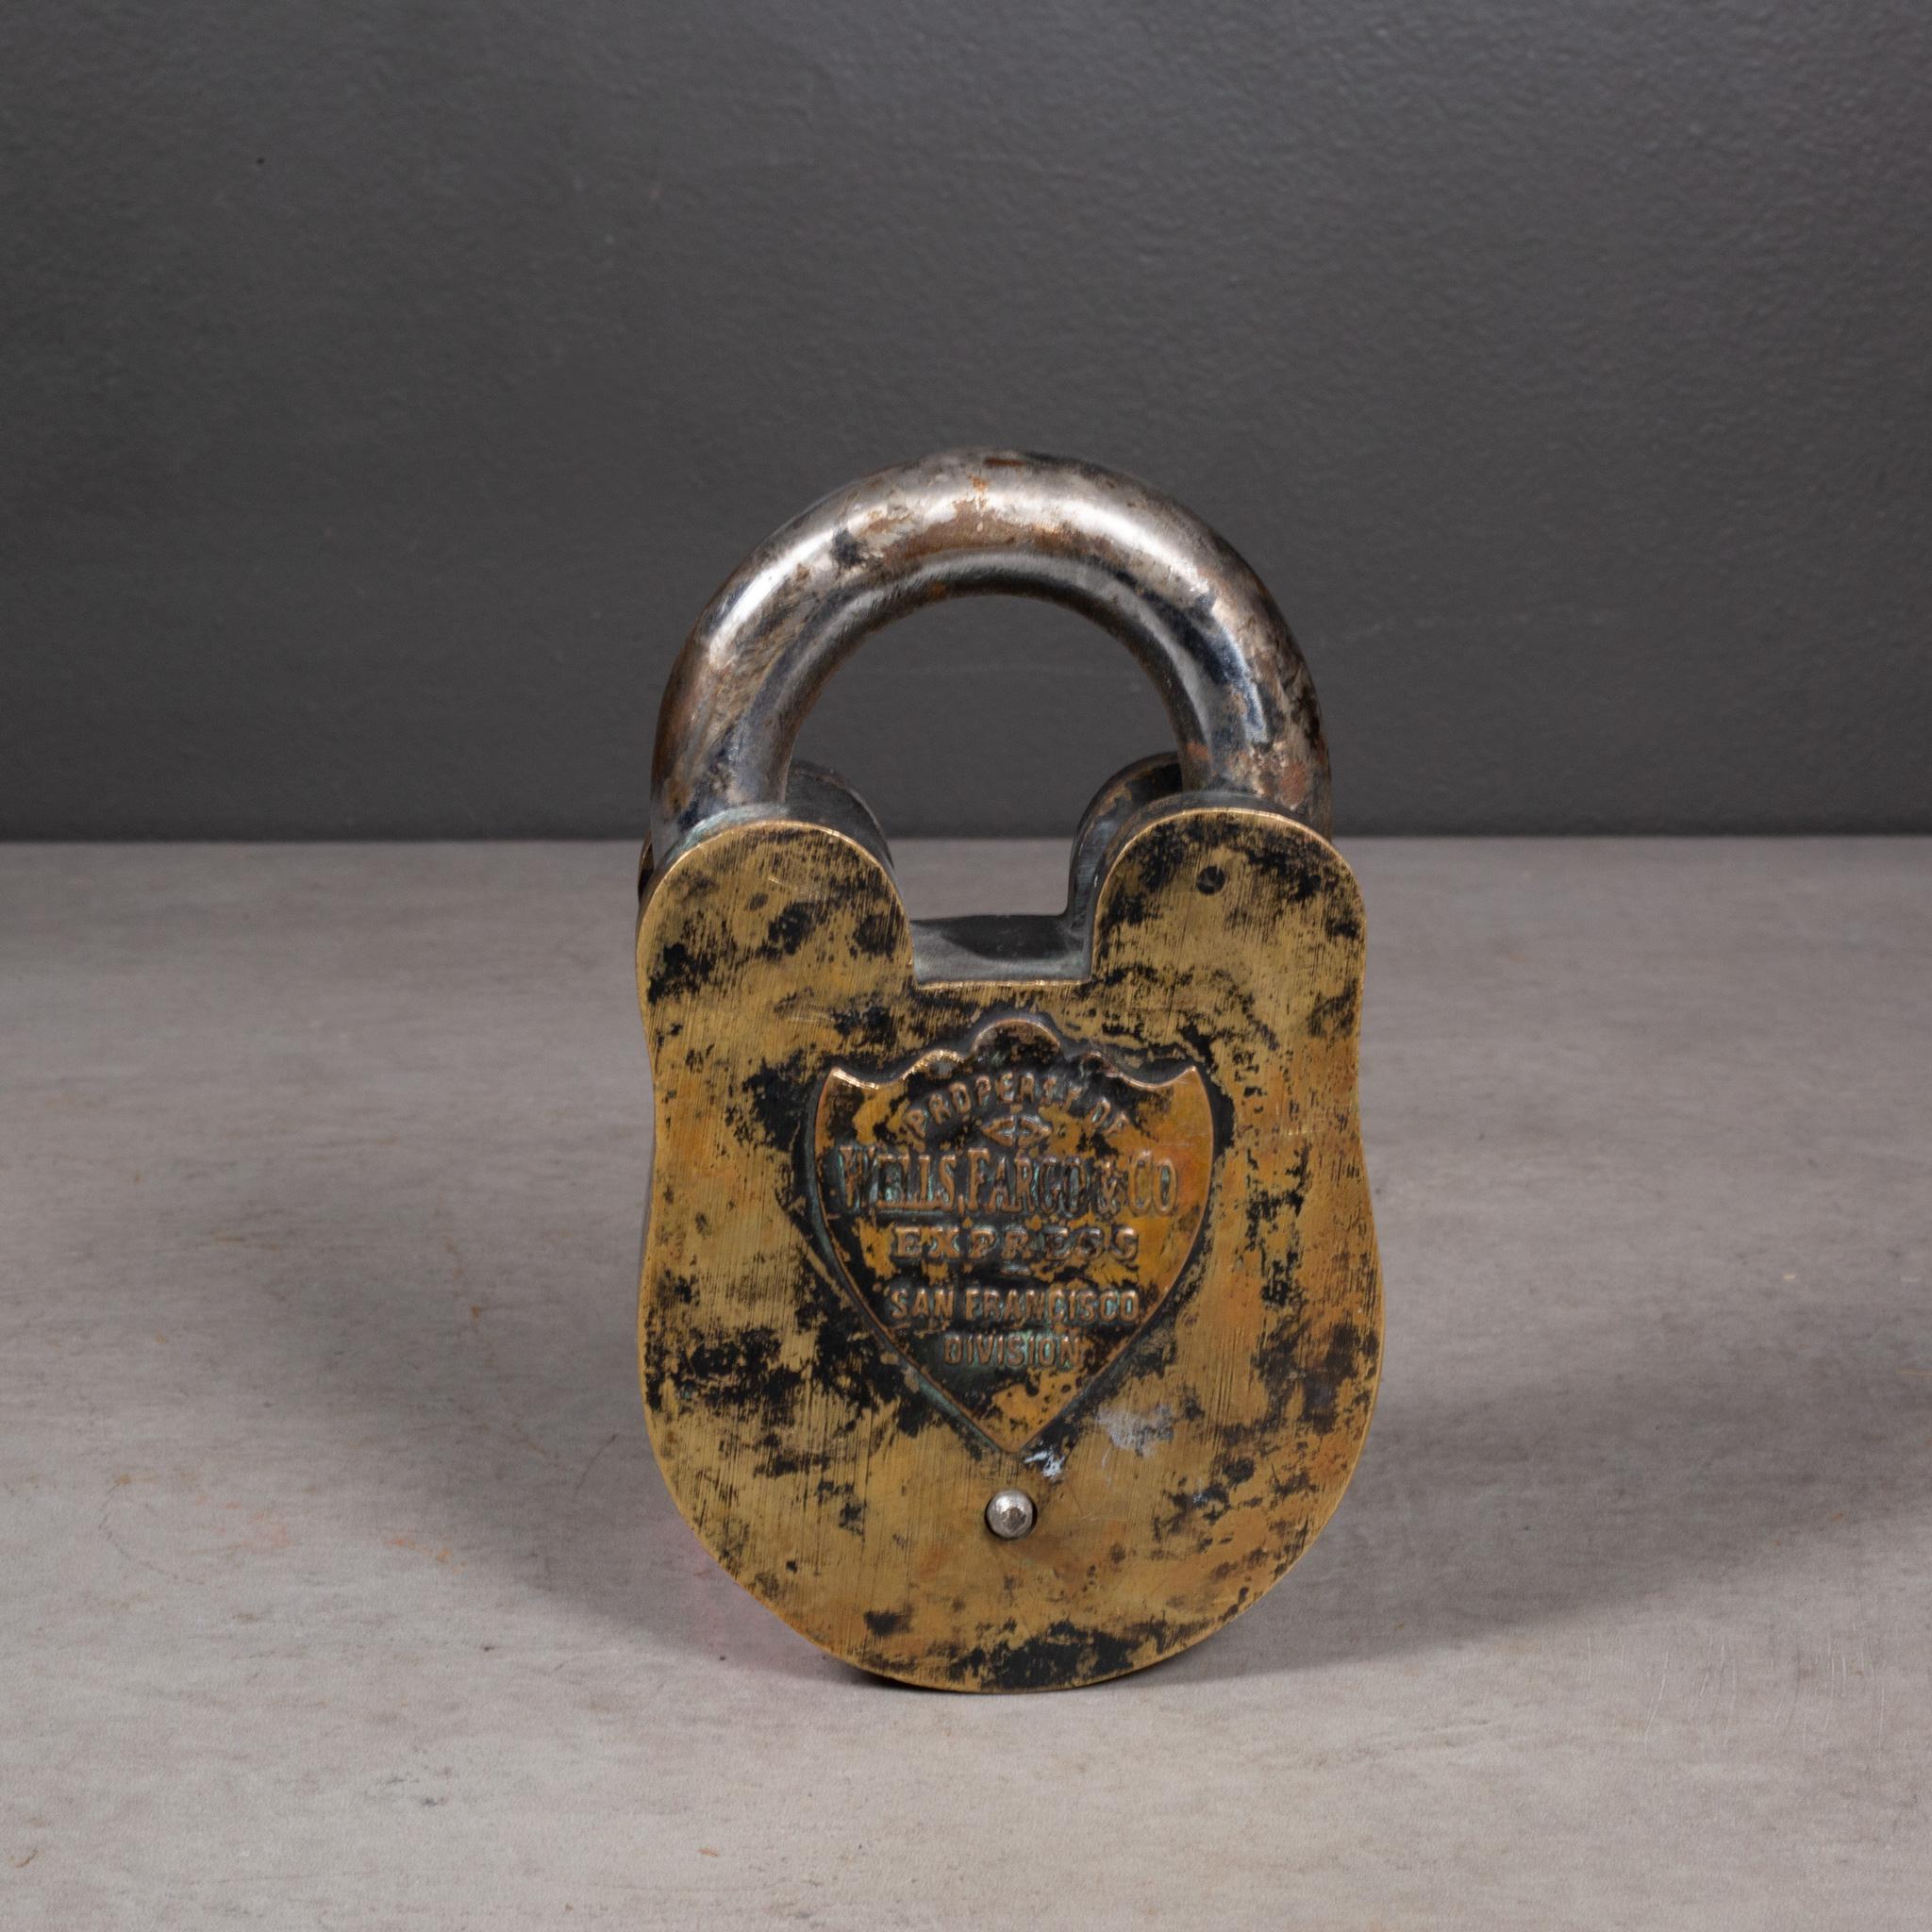 ABOUT

An original antique bronze and steel padlock with working key and brass medallion from Wells Fargo Bank in San Francisco. The key locks and unlocks the padlock properly.

    CREATOR Wells Fargo, San Francisco. 
    DATE OF MANUFACTURE